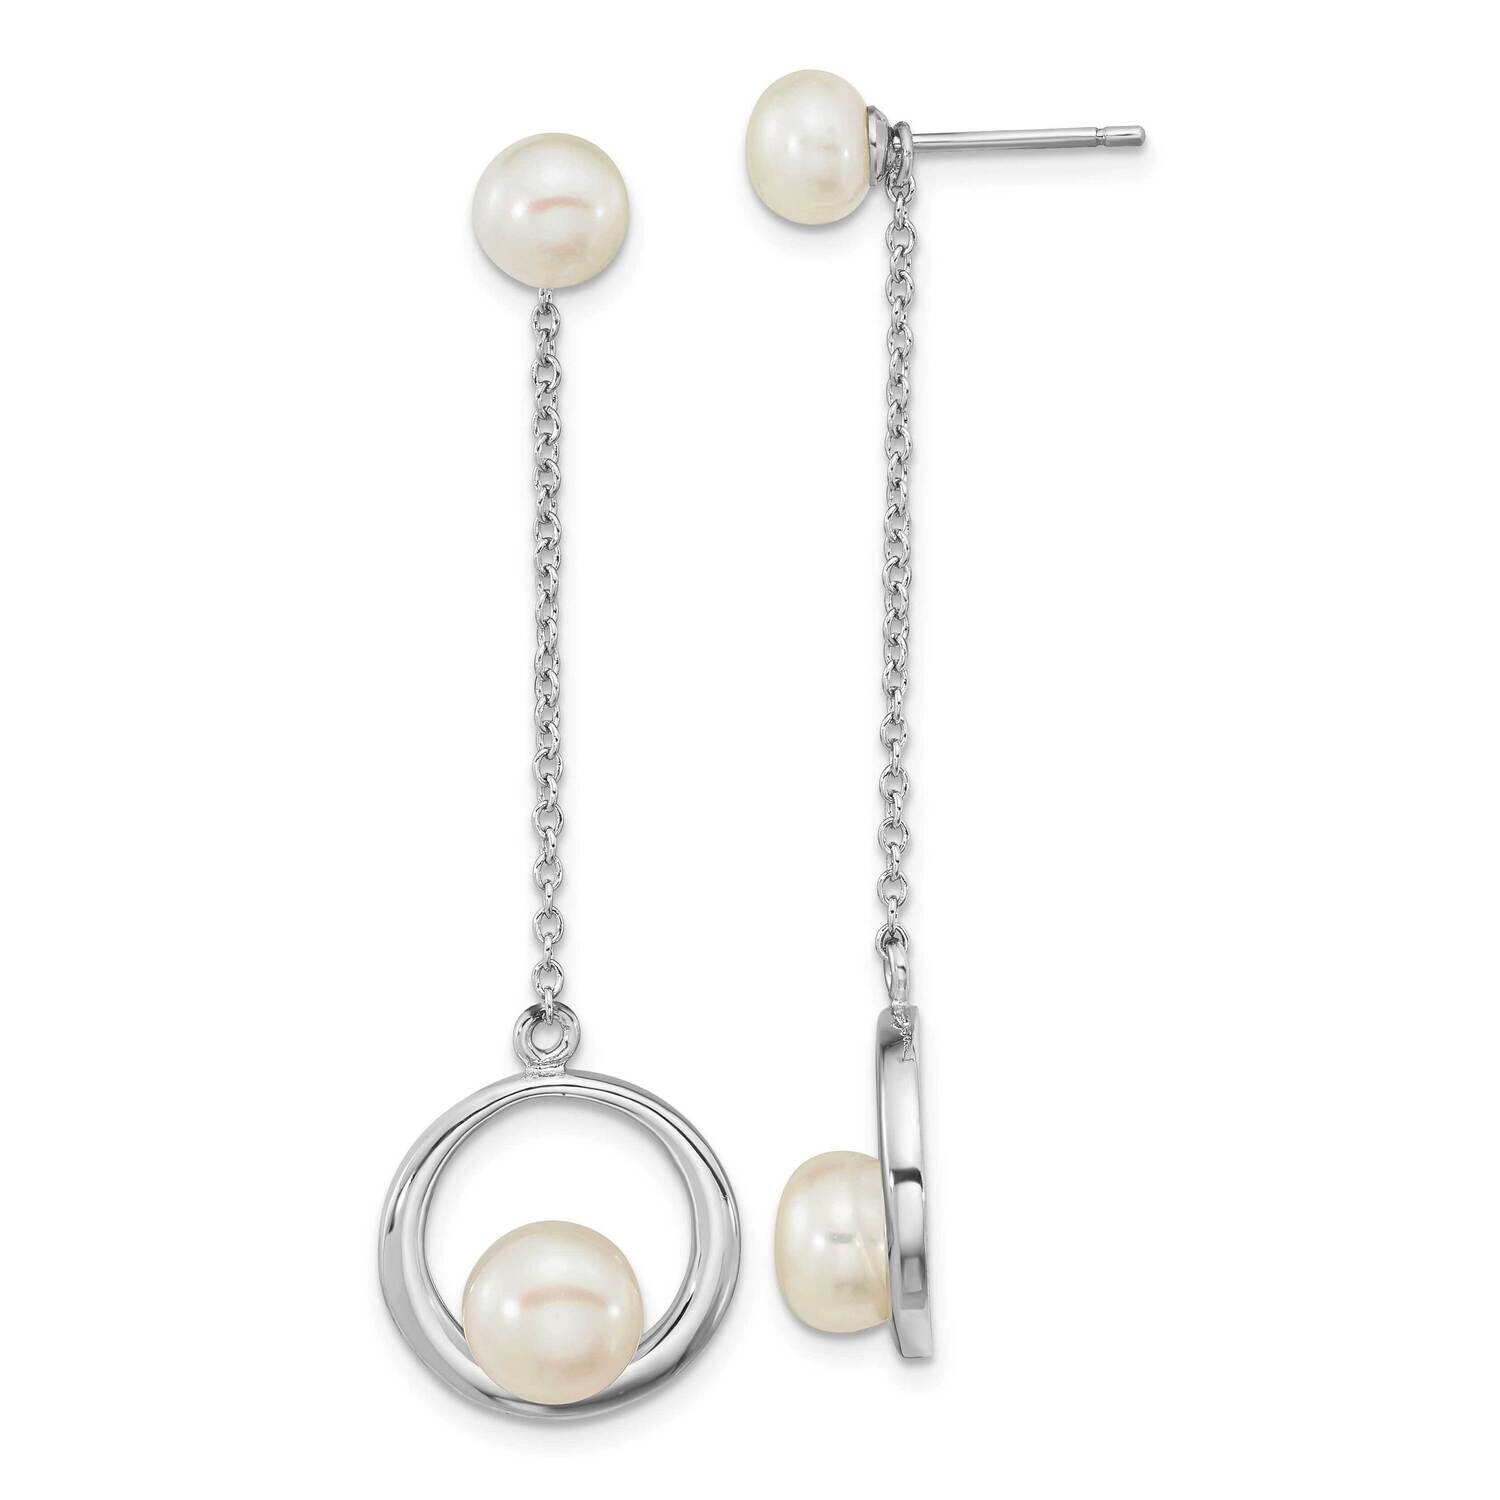 6-7mm White Button Fwc Pearl Dangle Earrings Sterling Silver Rhodium-Plated QE16358